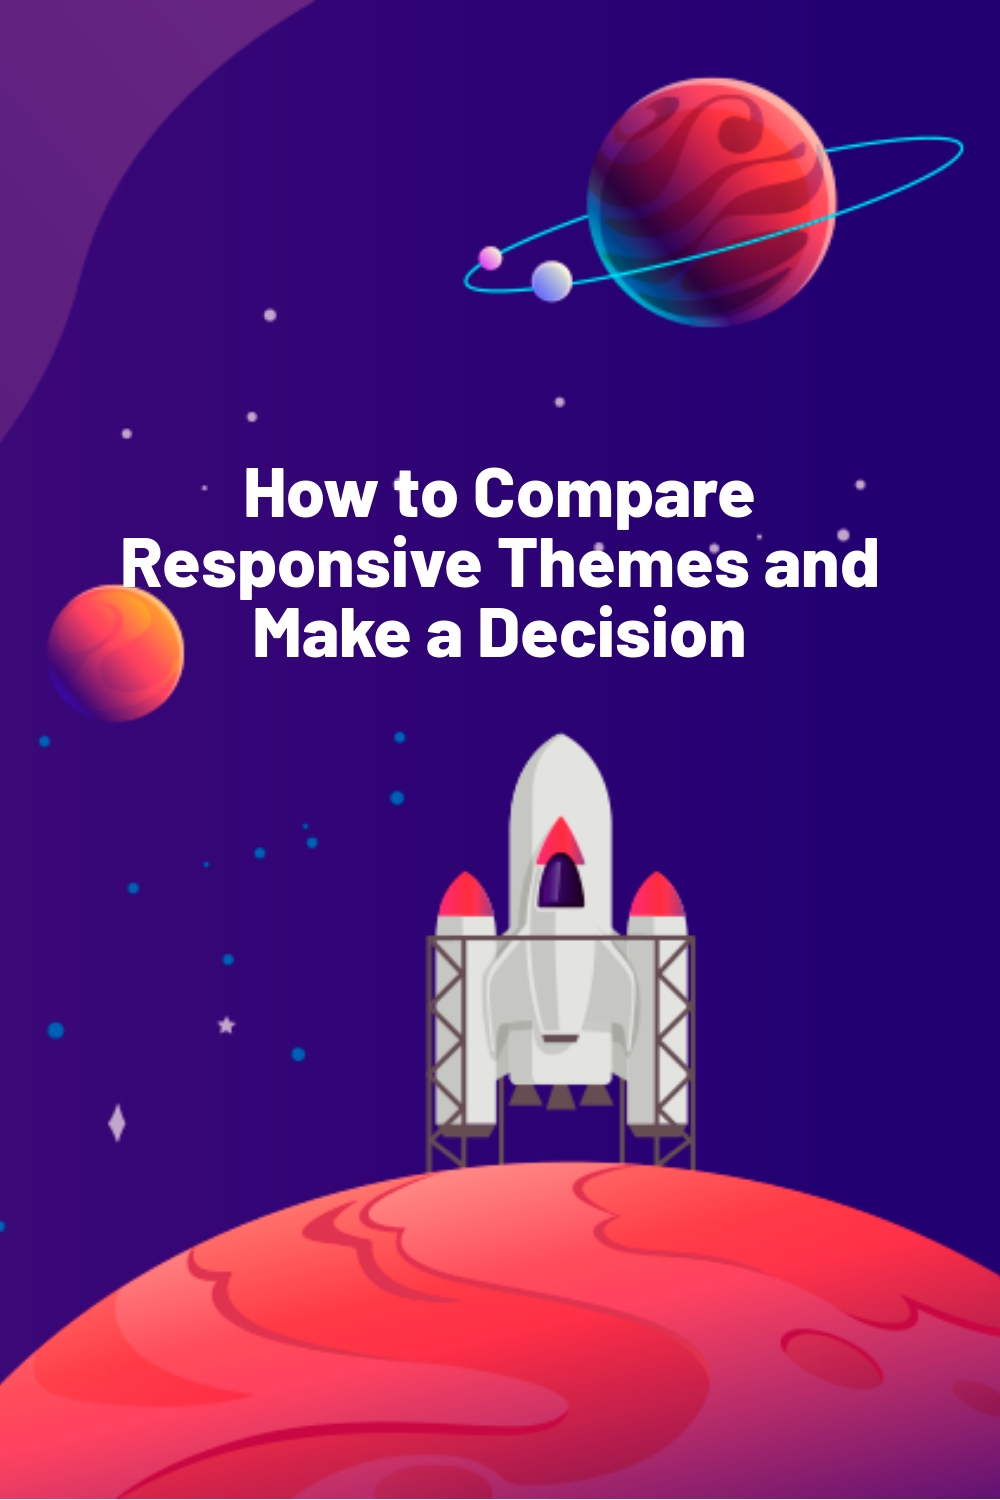 How to Compare Responsive Themes and Make a Decision